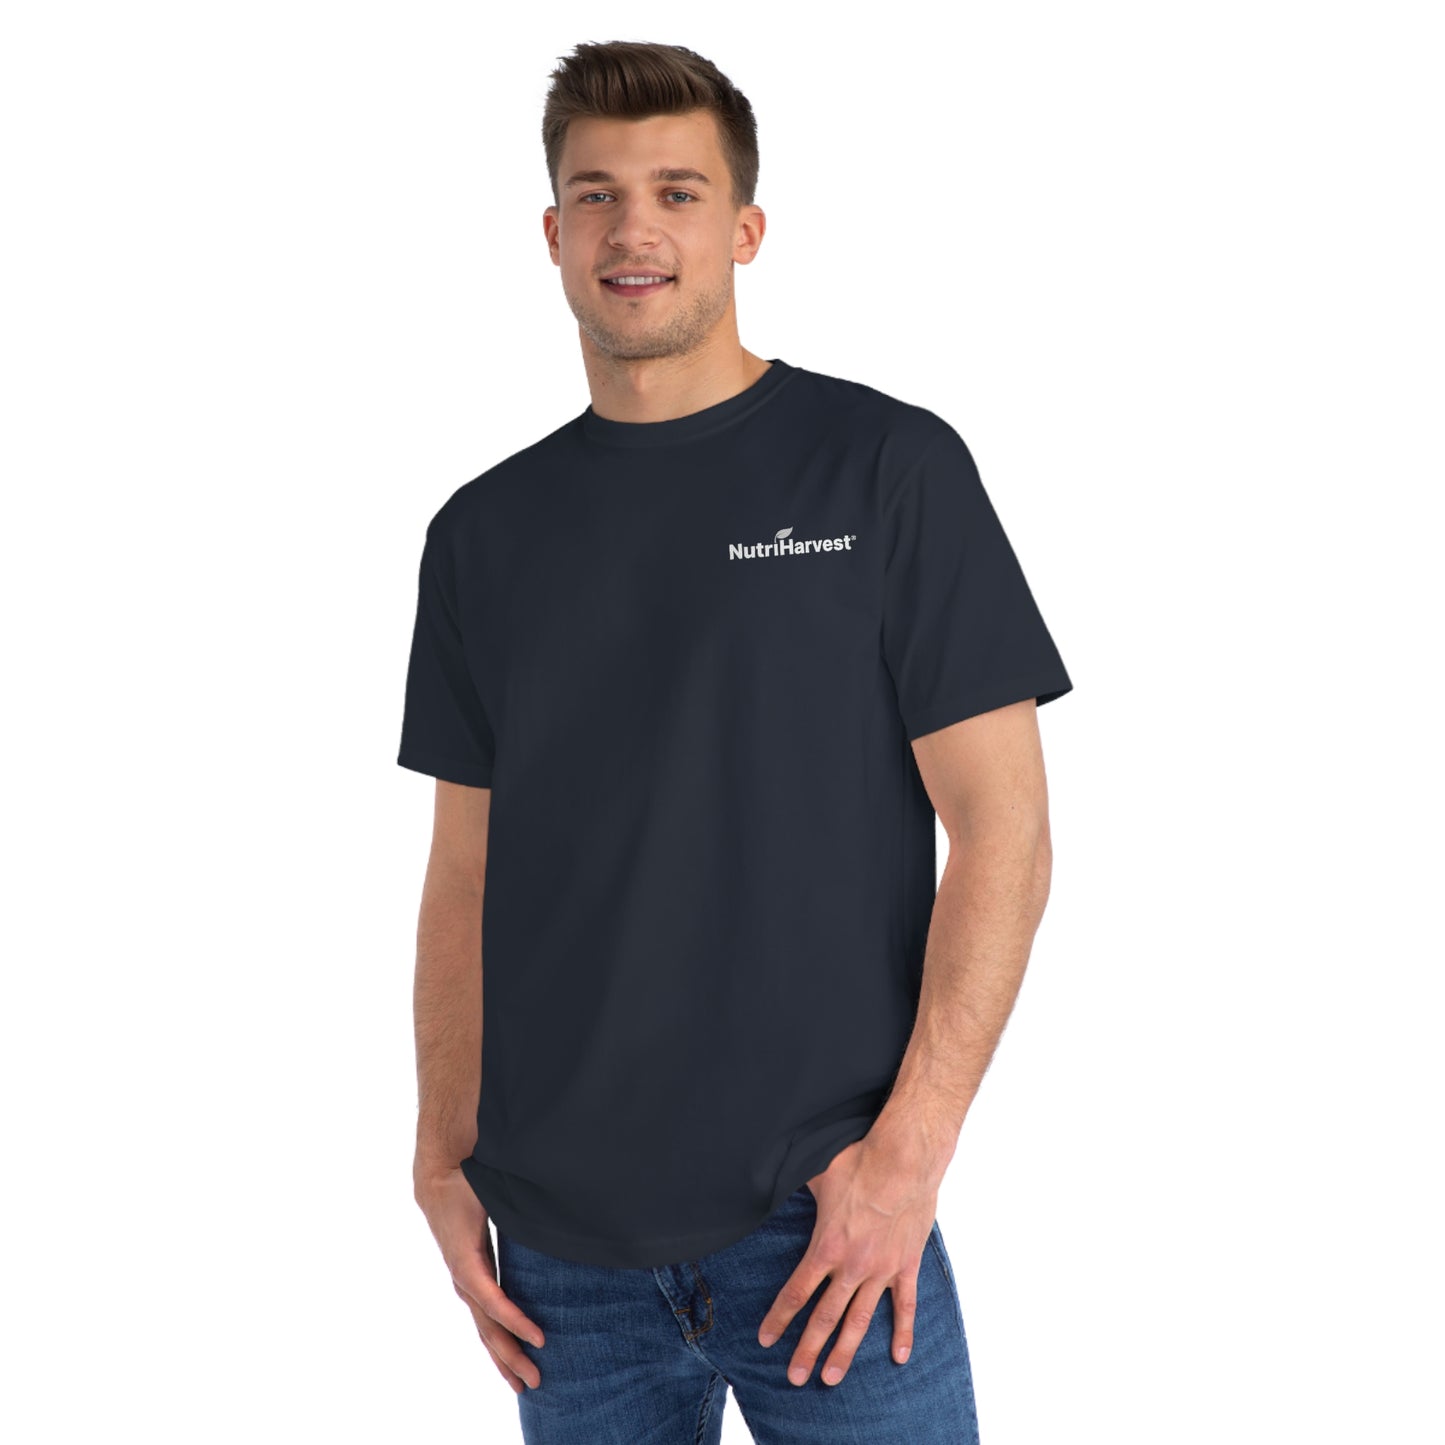 Organic Unisex Classic T-Shirt NutriHarvest® Casual in White, Black, Pacific, and Charcoal